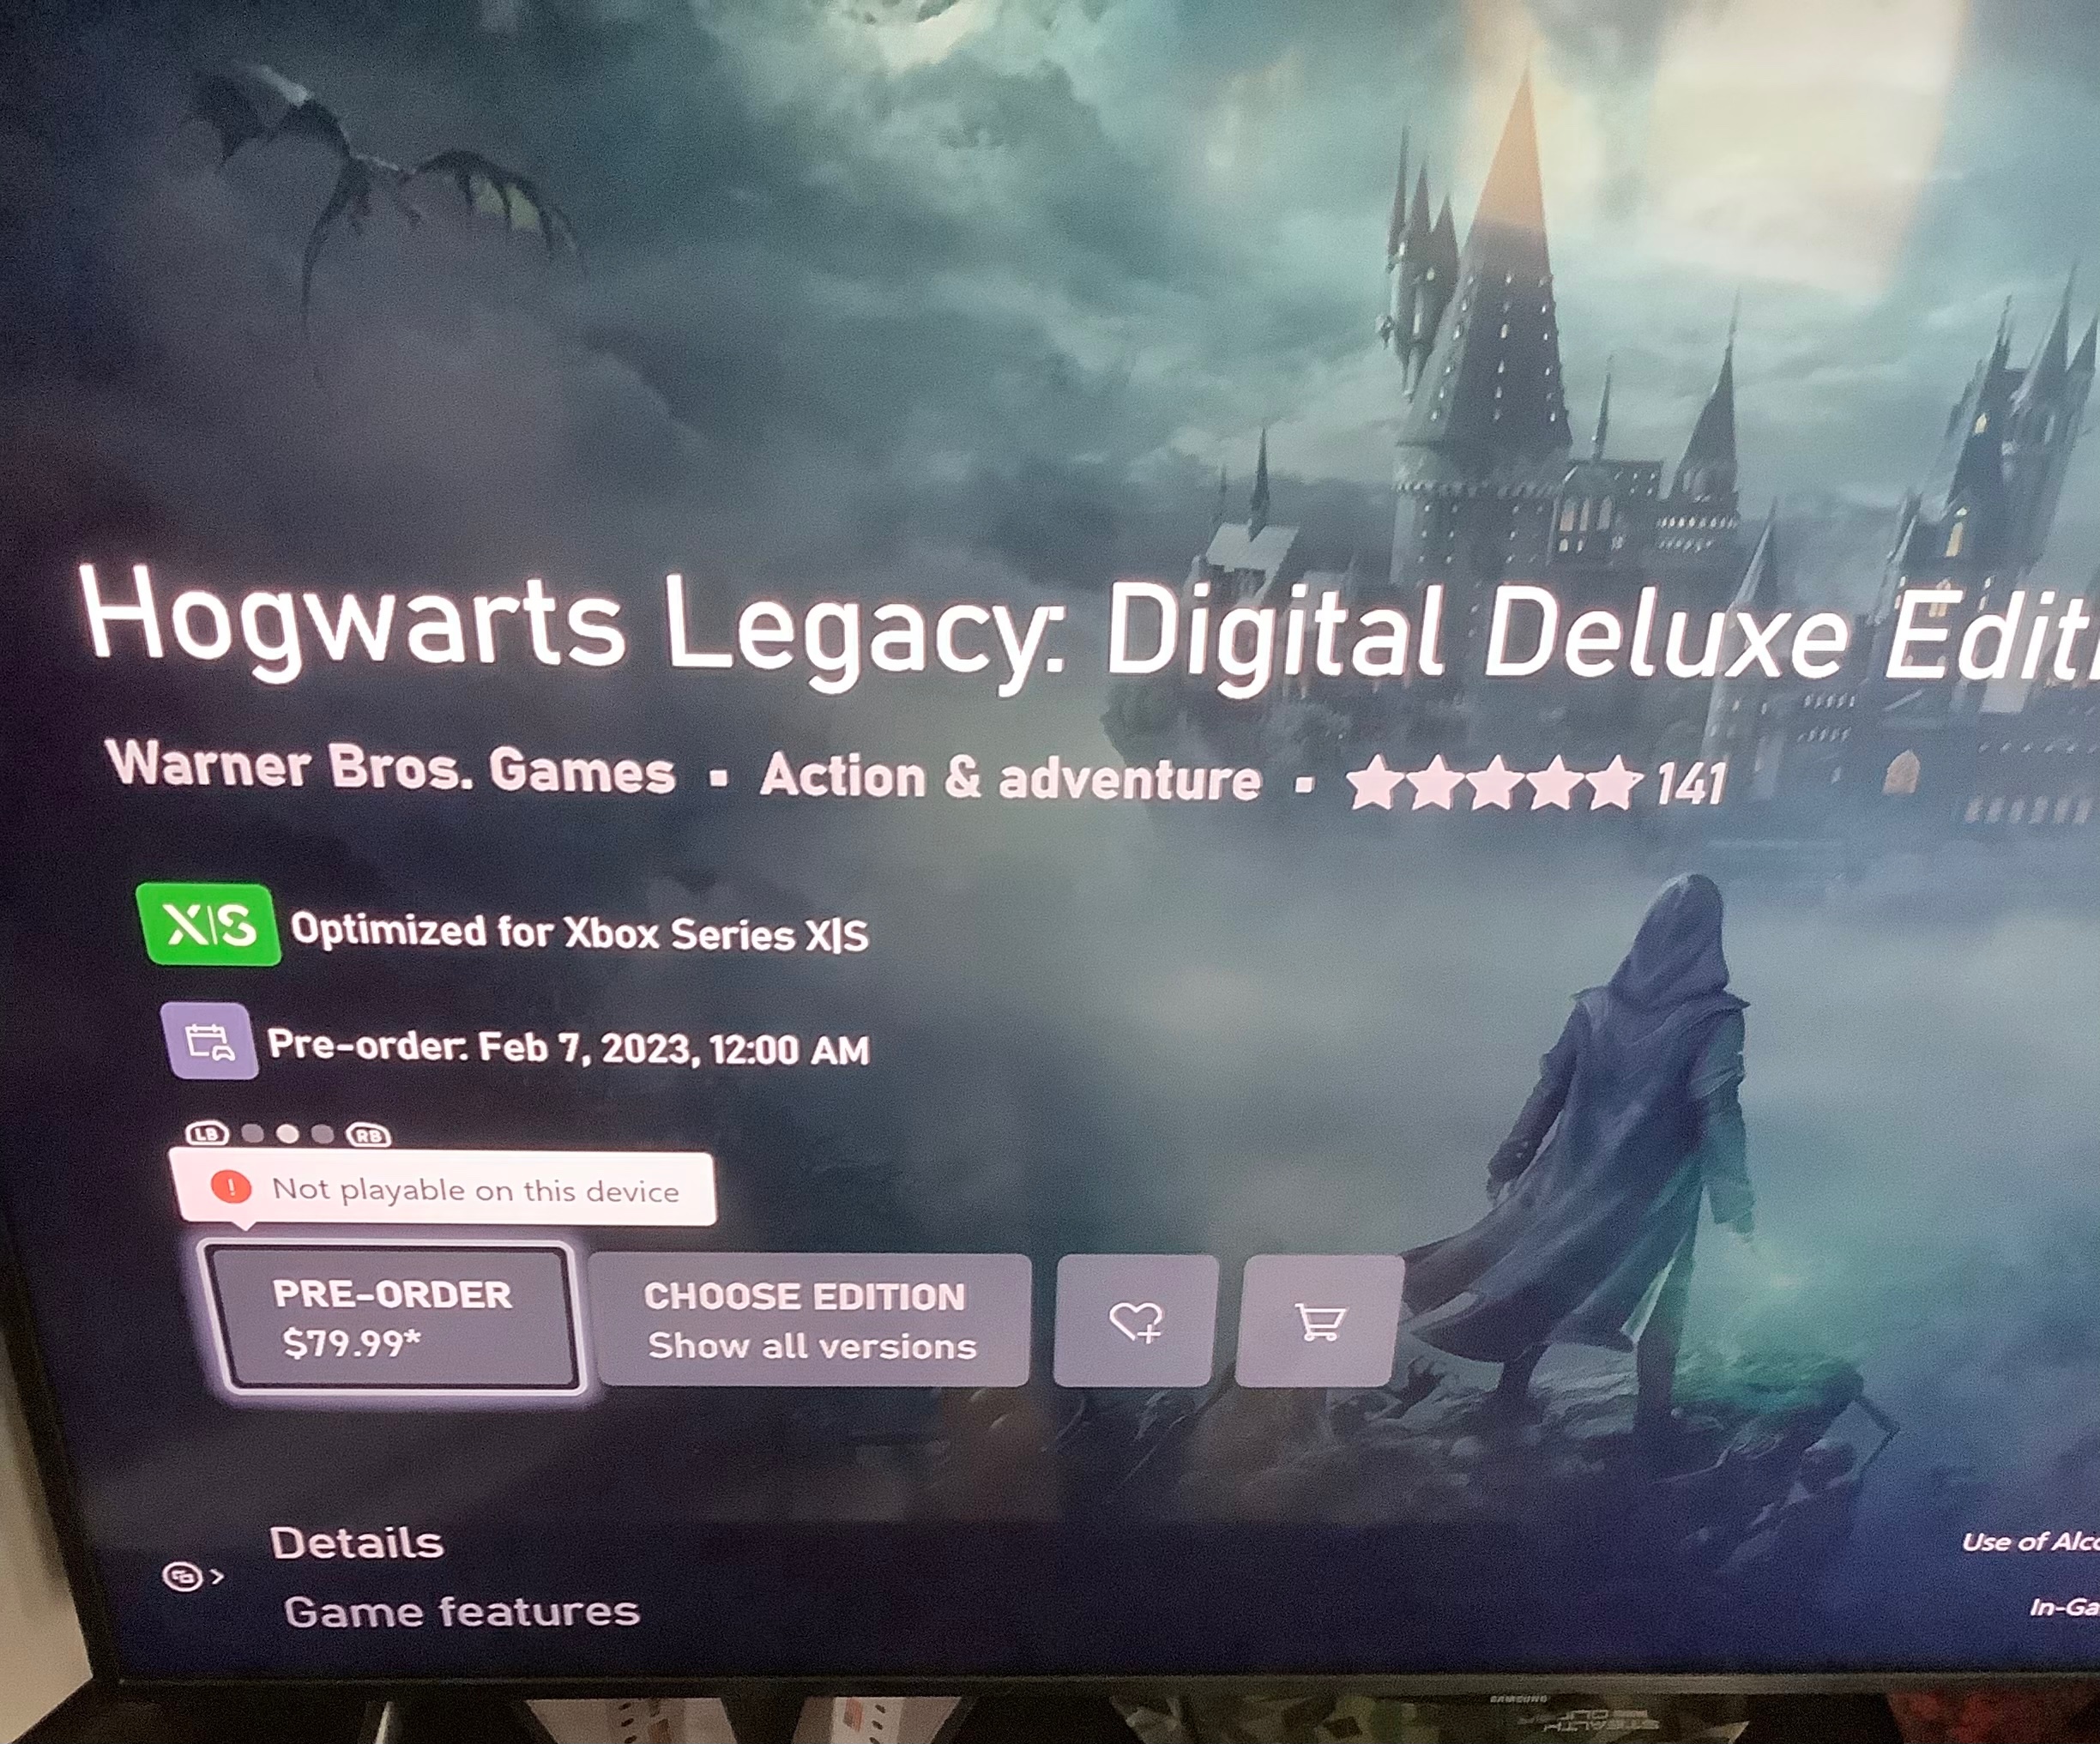 - device? Not Microsoft Community on playable this